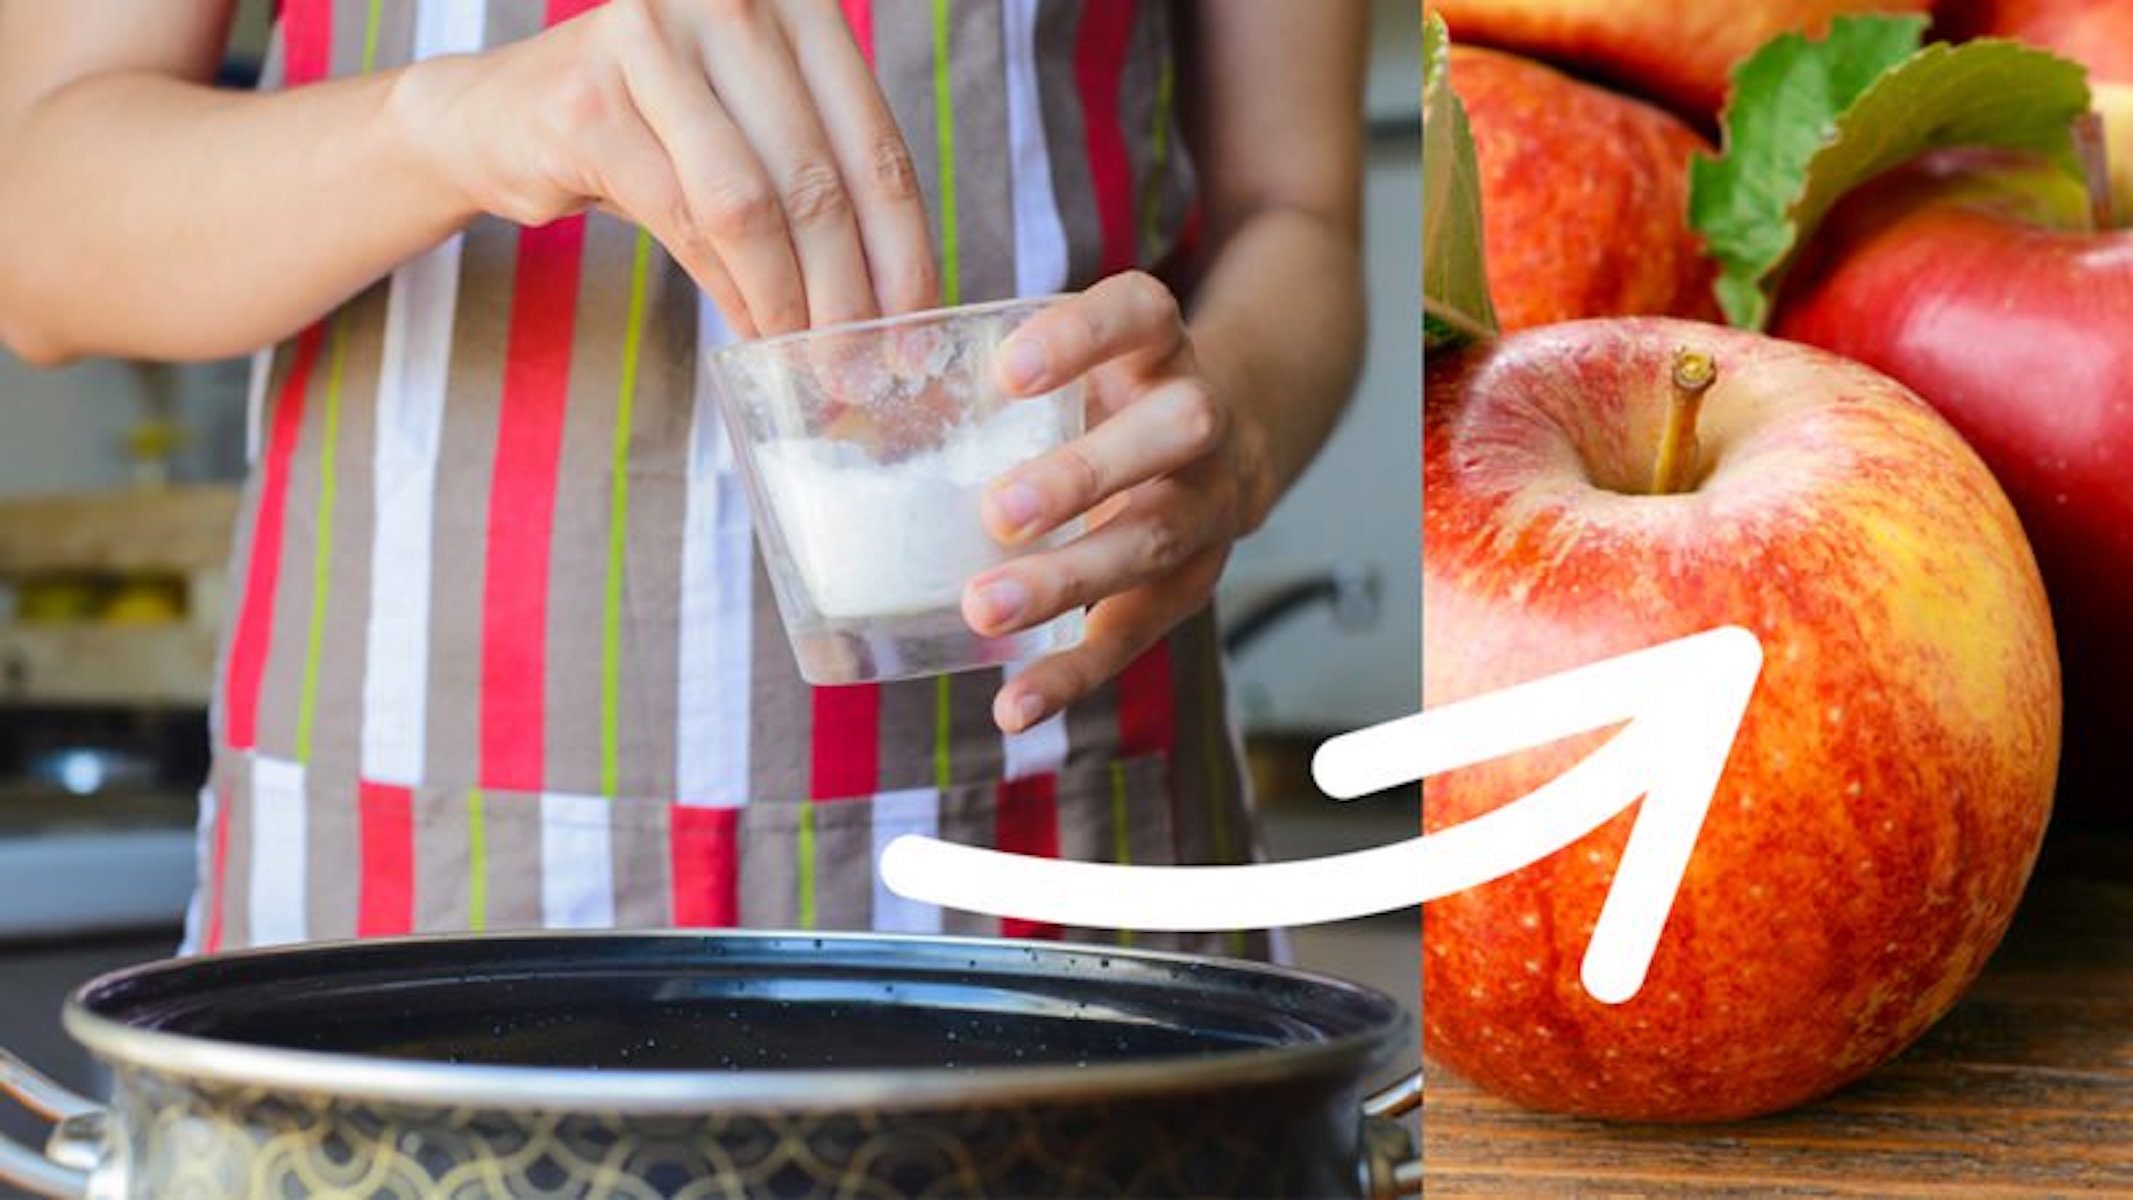 Here's How to Keep Apples from Browning Without Lemon Juice